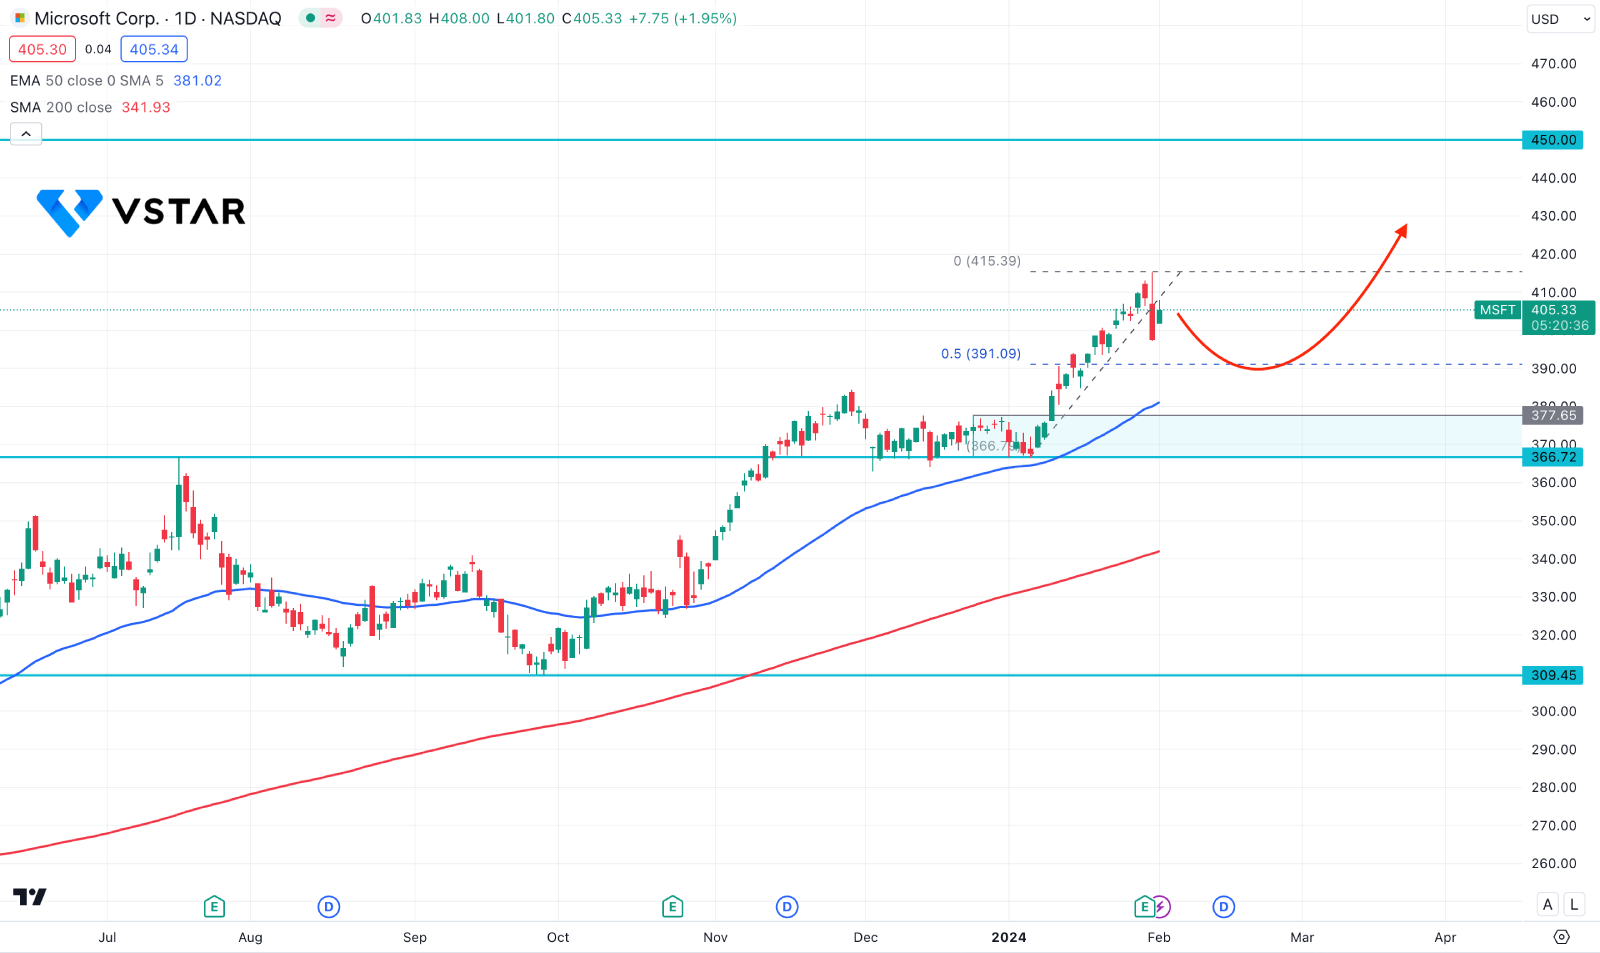 Microsoft Stock (MSFT) Remained Steady After Q2 Earnings Report